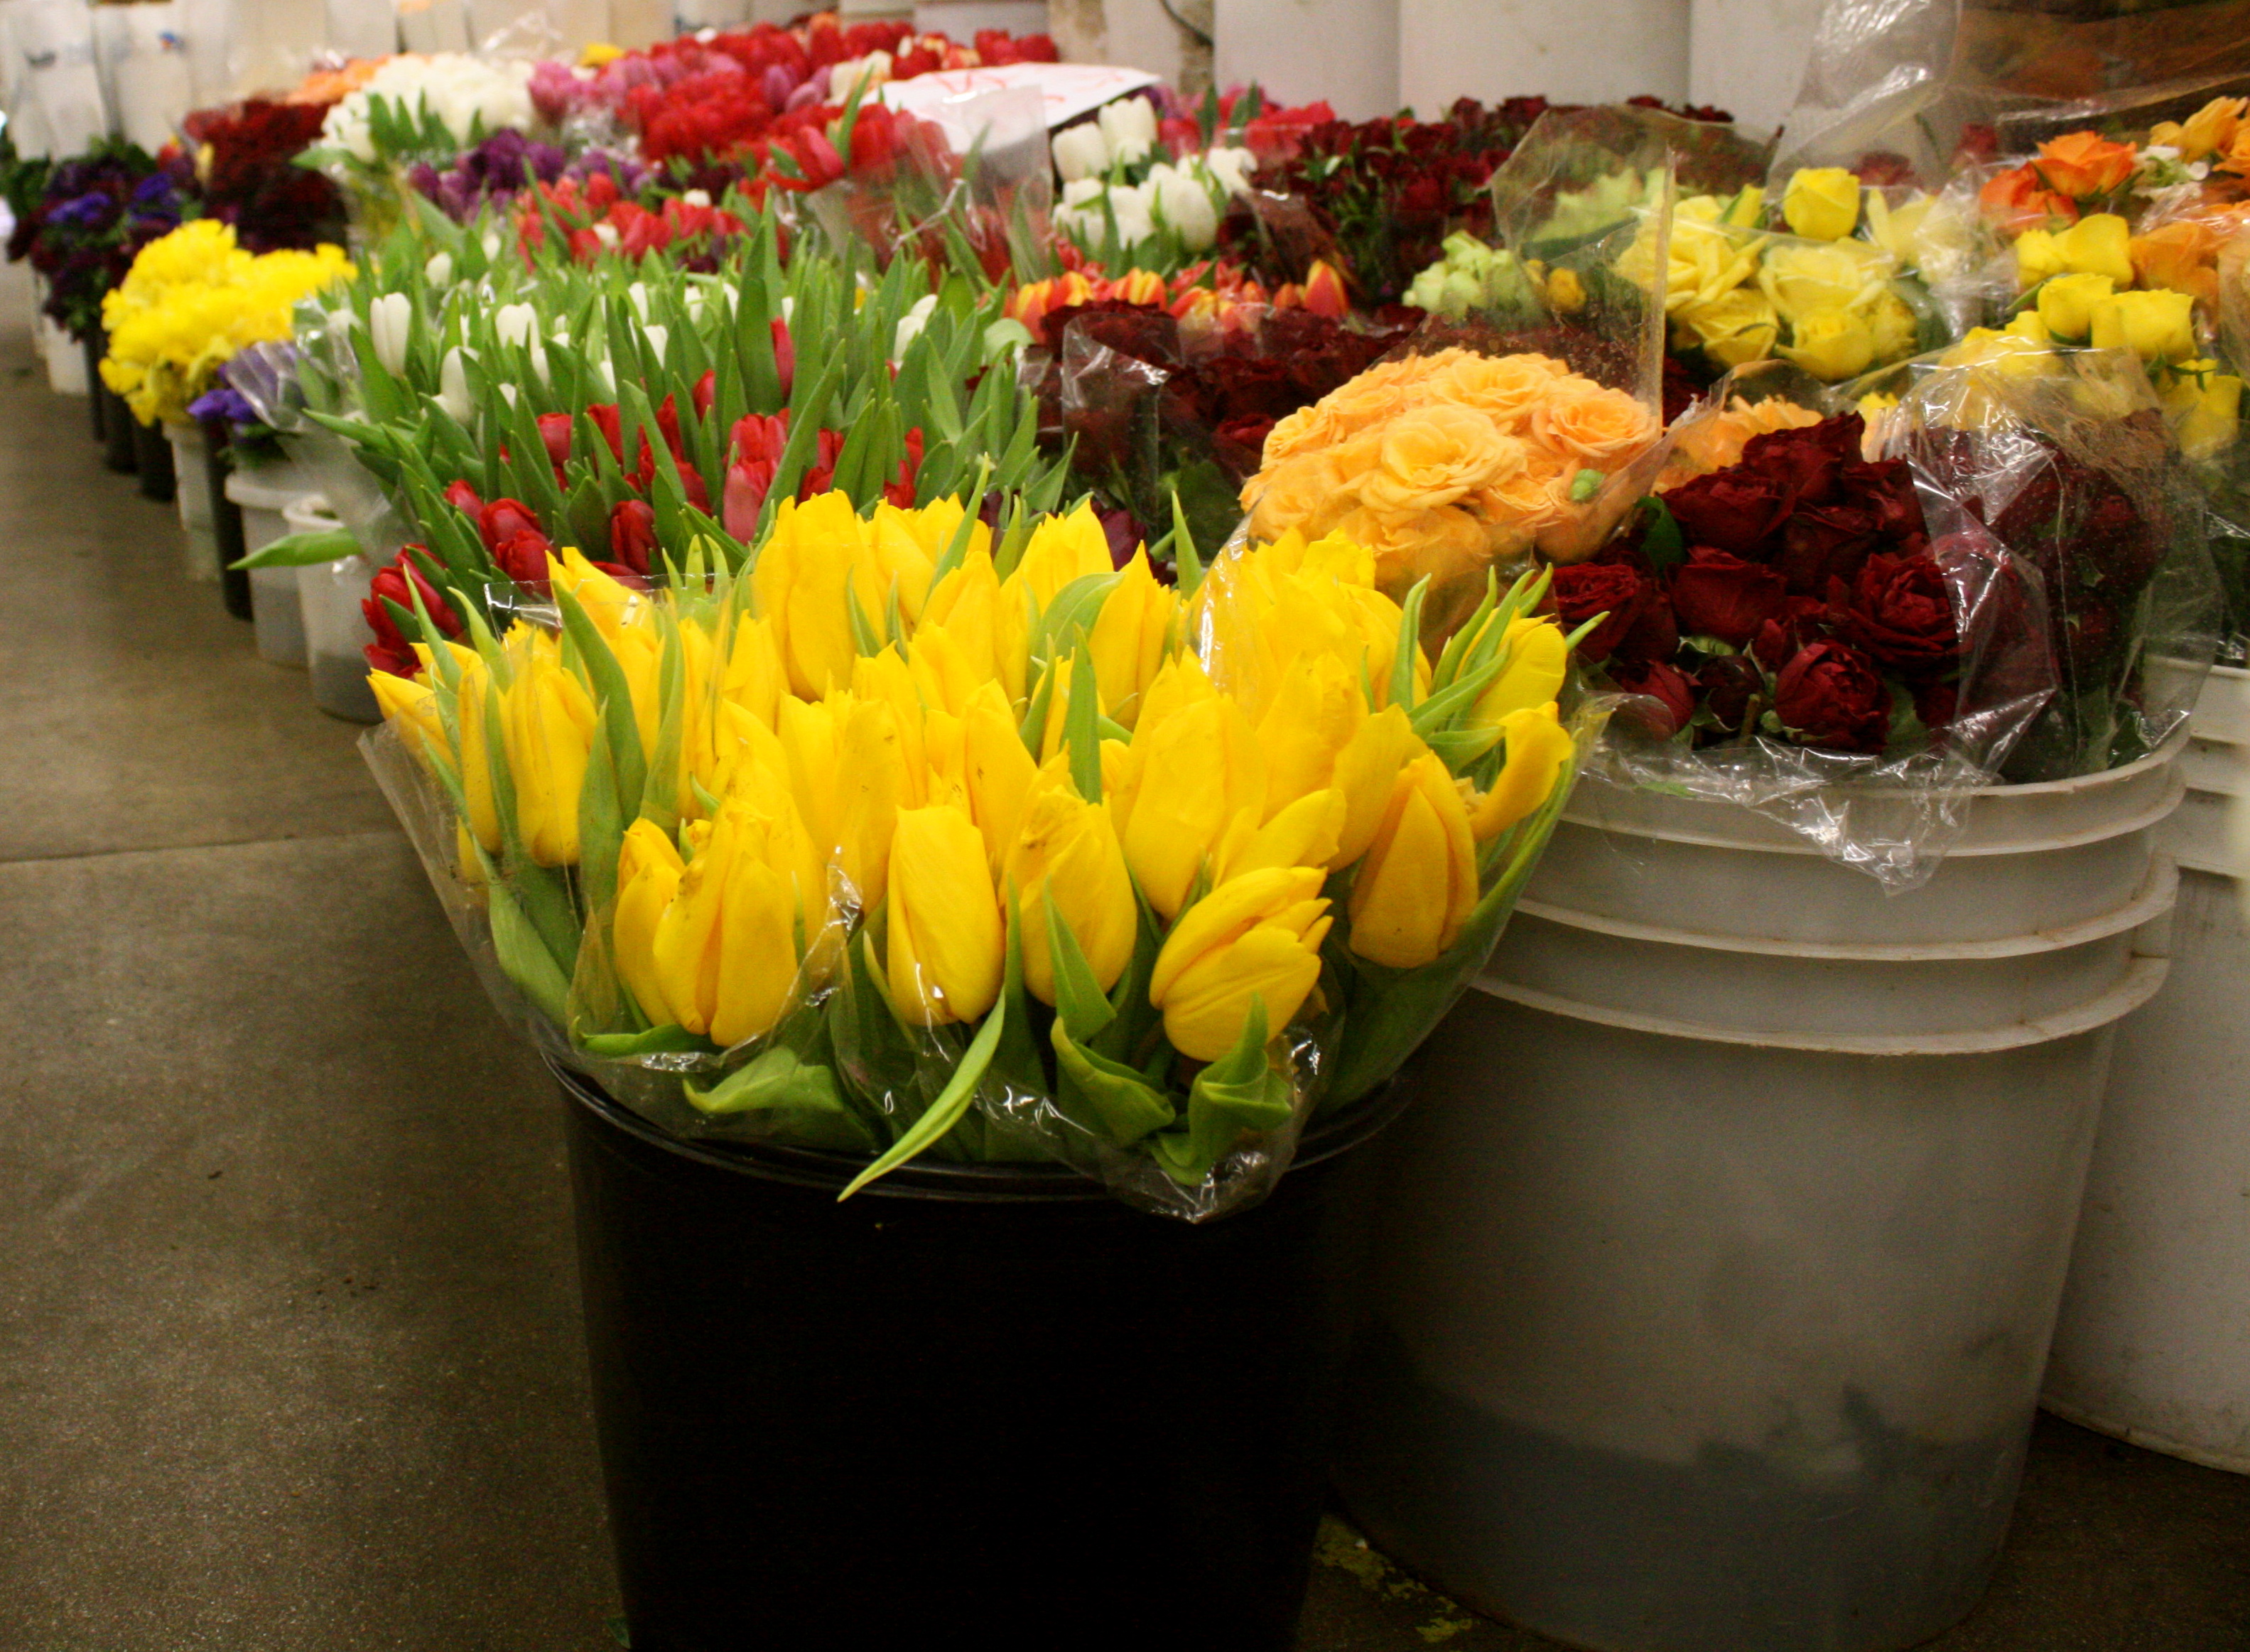 Blogs - L.A. Flower Market sells fresh flowers at wholesale price ...